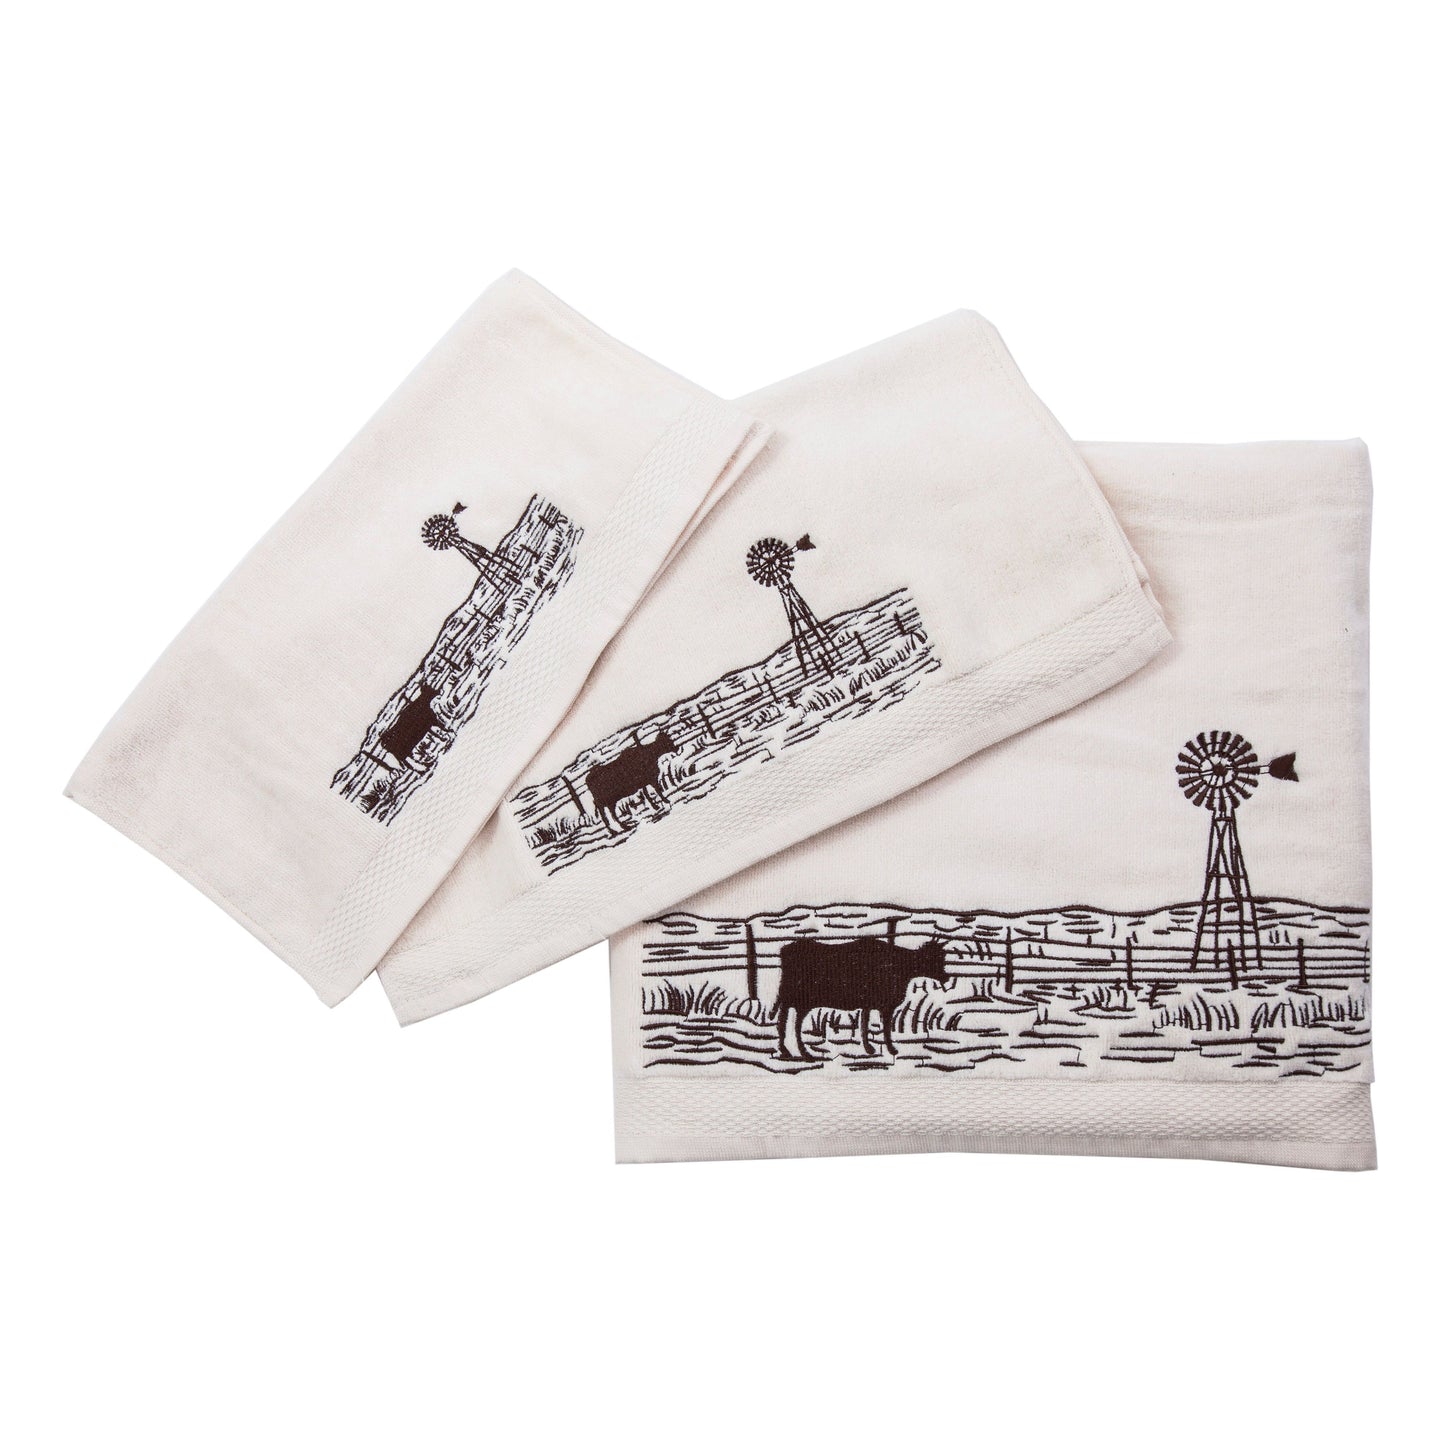 Embroidered Windmill Towel Set